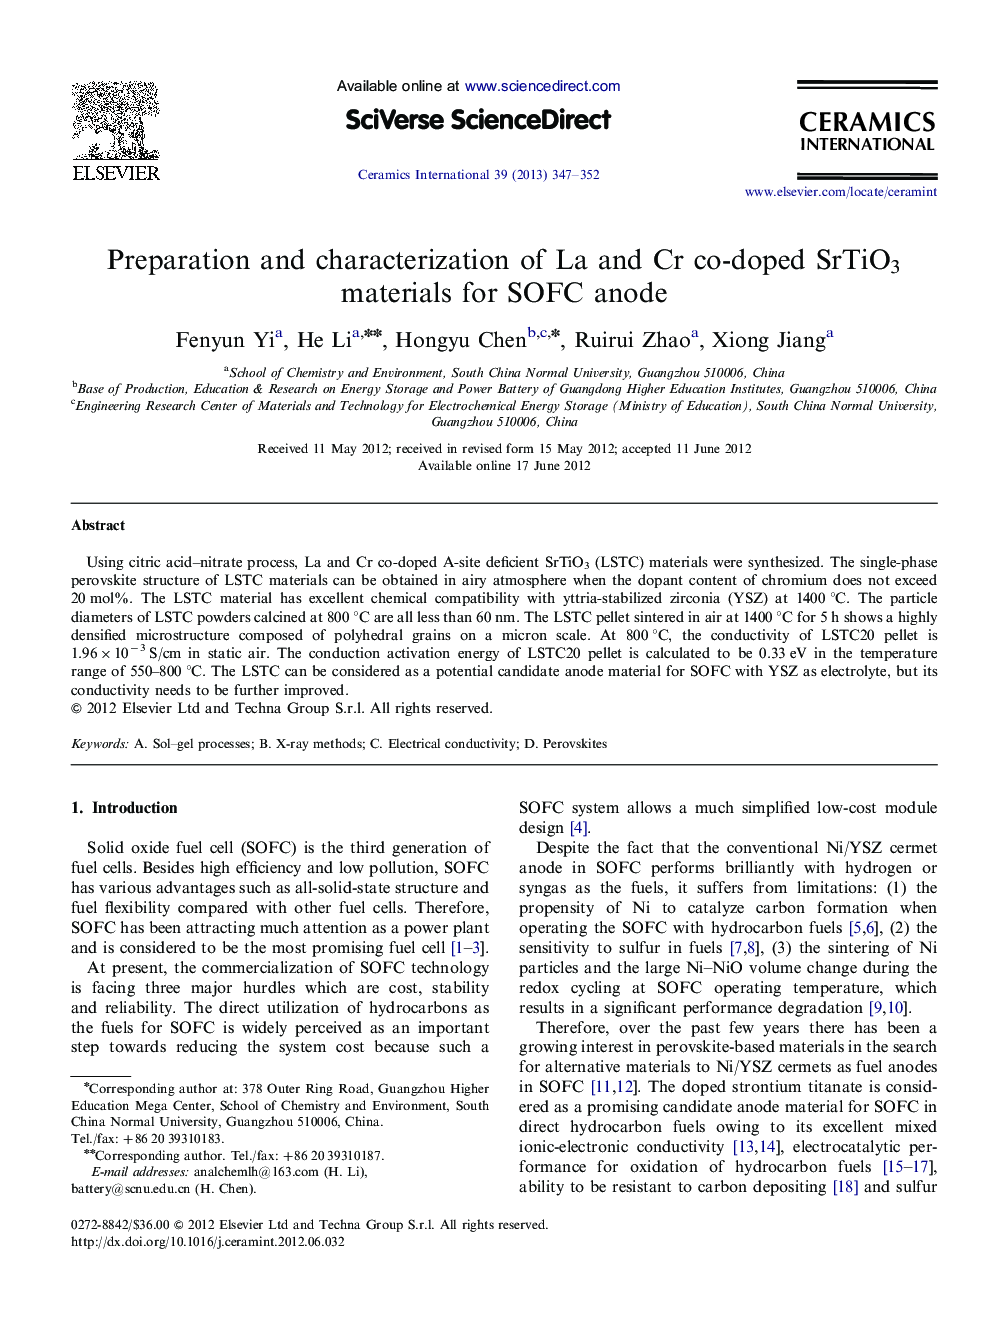 Preparation and characterization of La and Cr co-doped SrTiO3 materials for SOFC anode